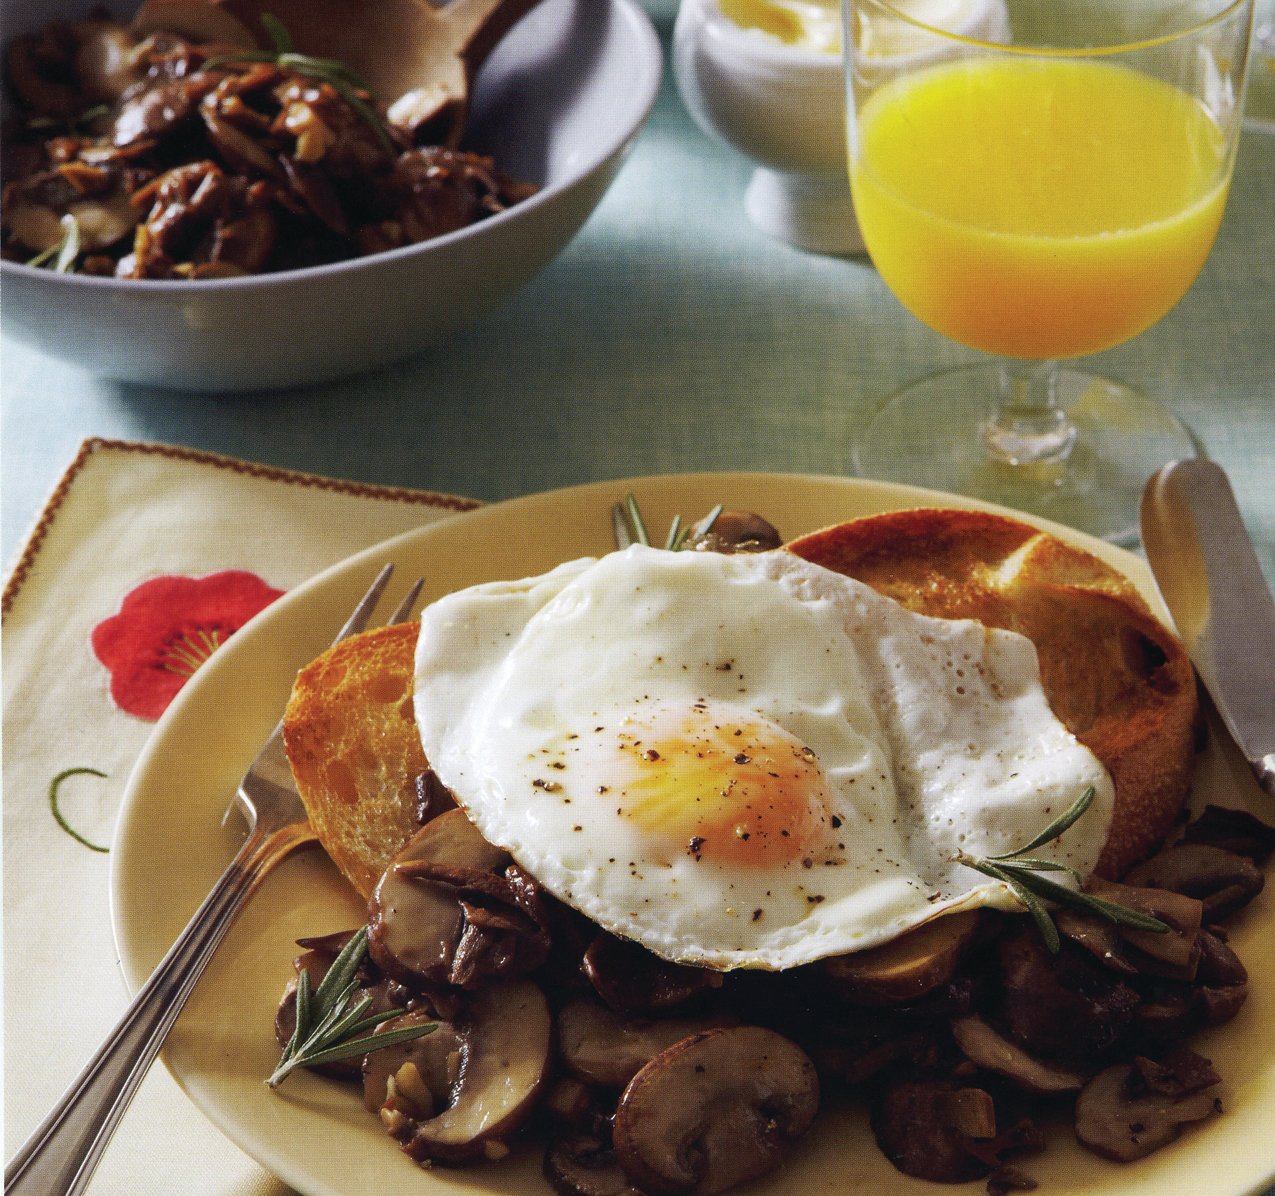 Pan-fried eggs and mixed mushroom sauté on toasted sourdough slices.